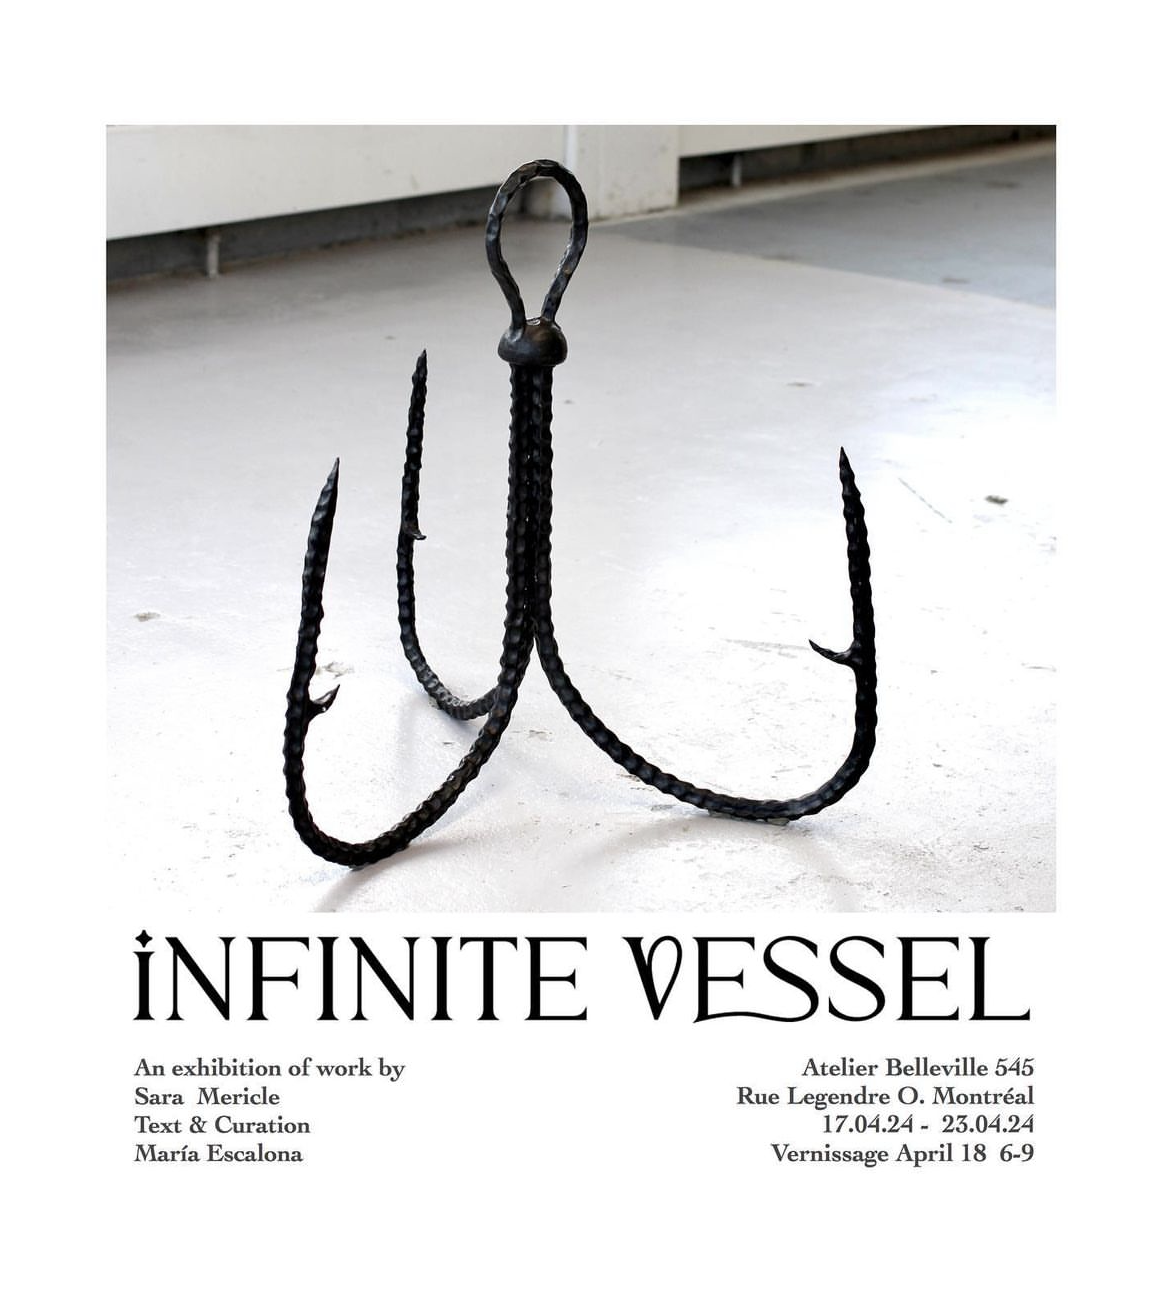 INFINITE VESSEL – an exhibition of work by Sara Mericle